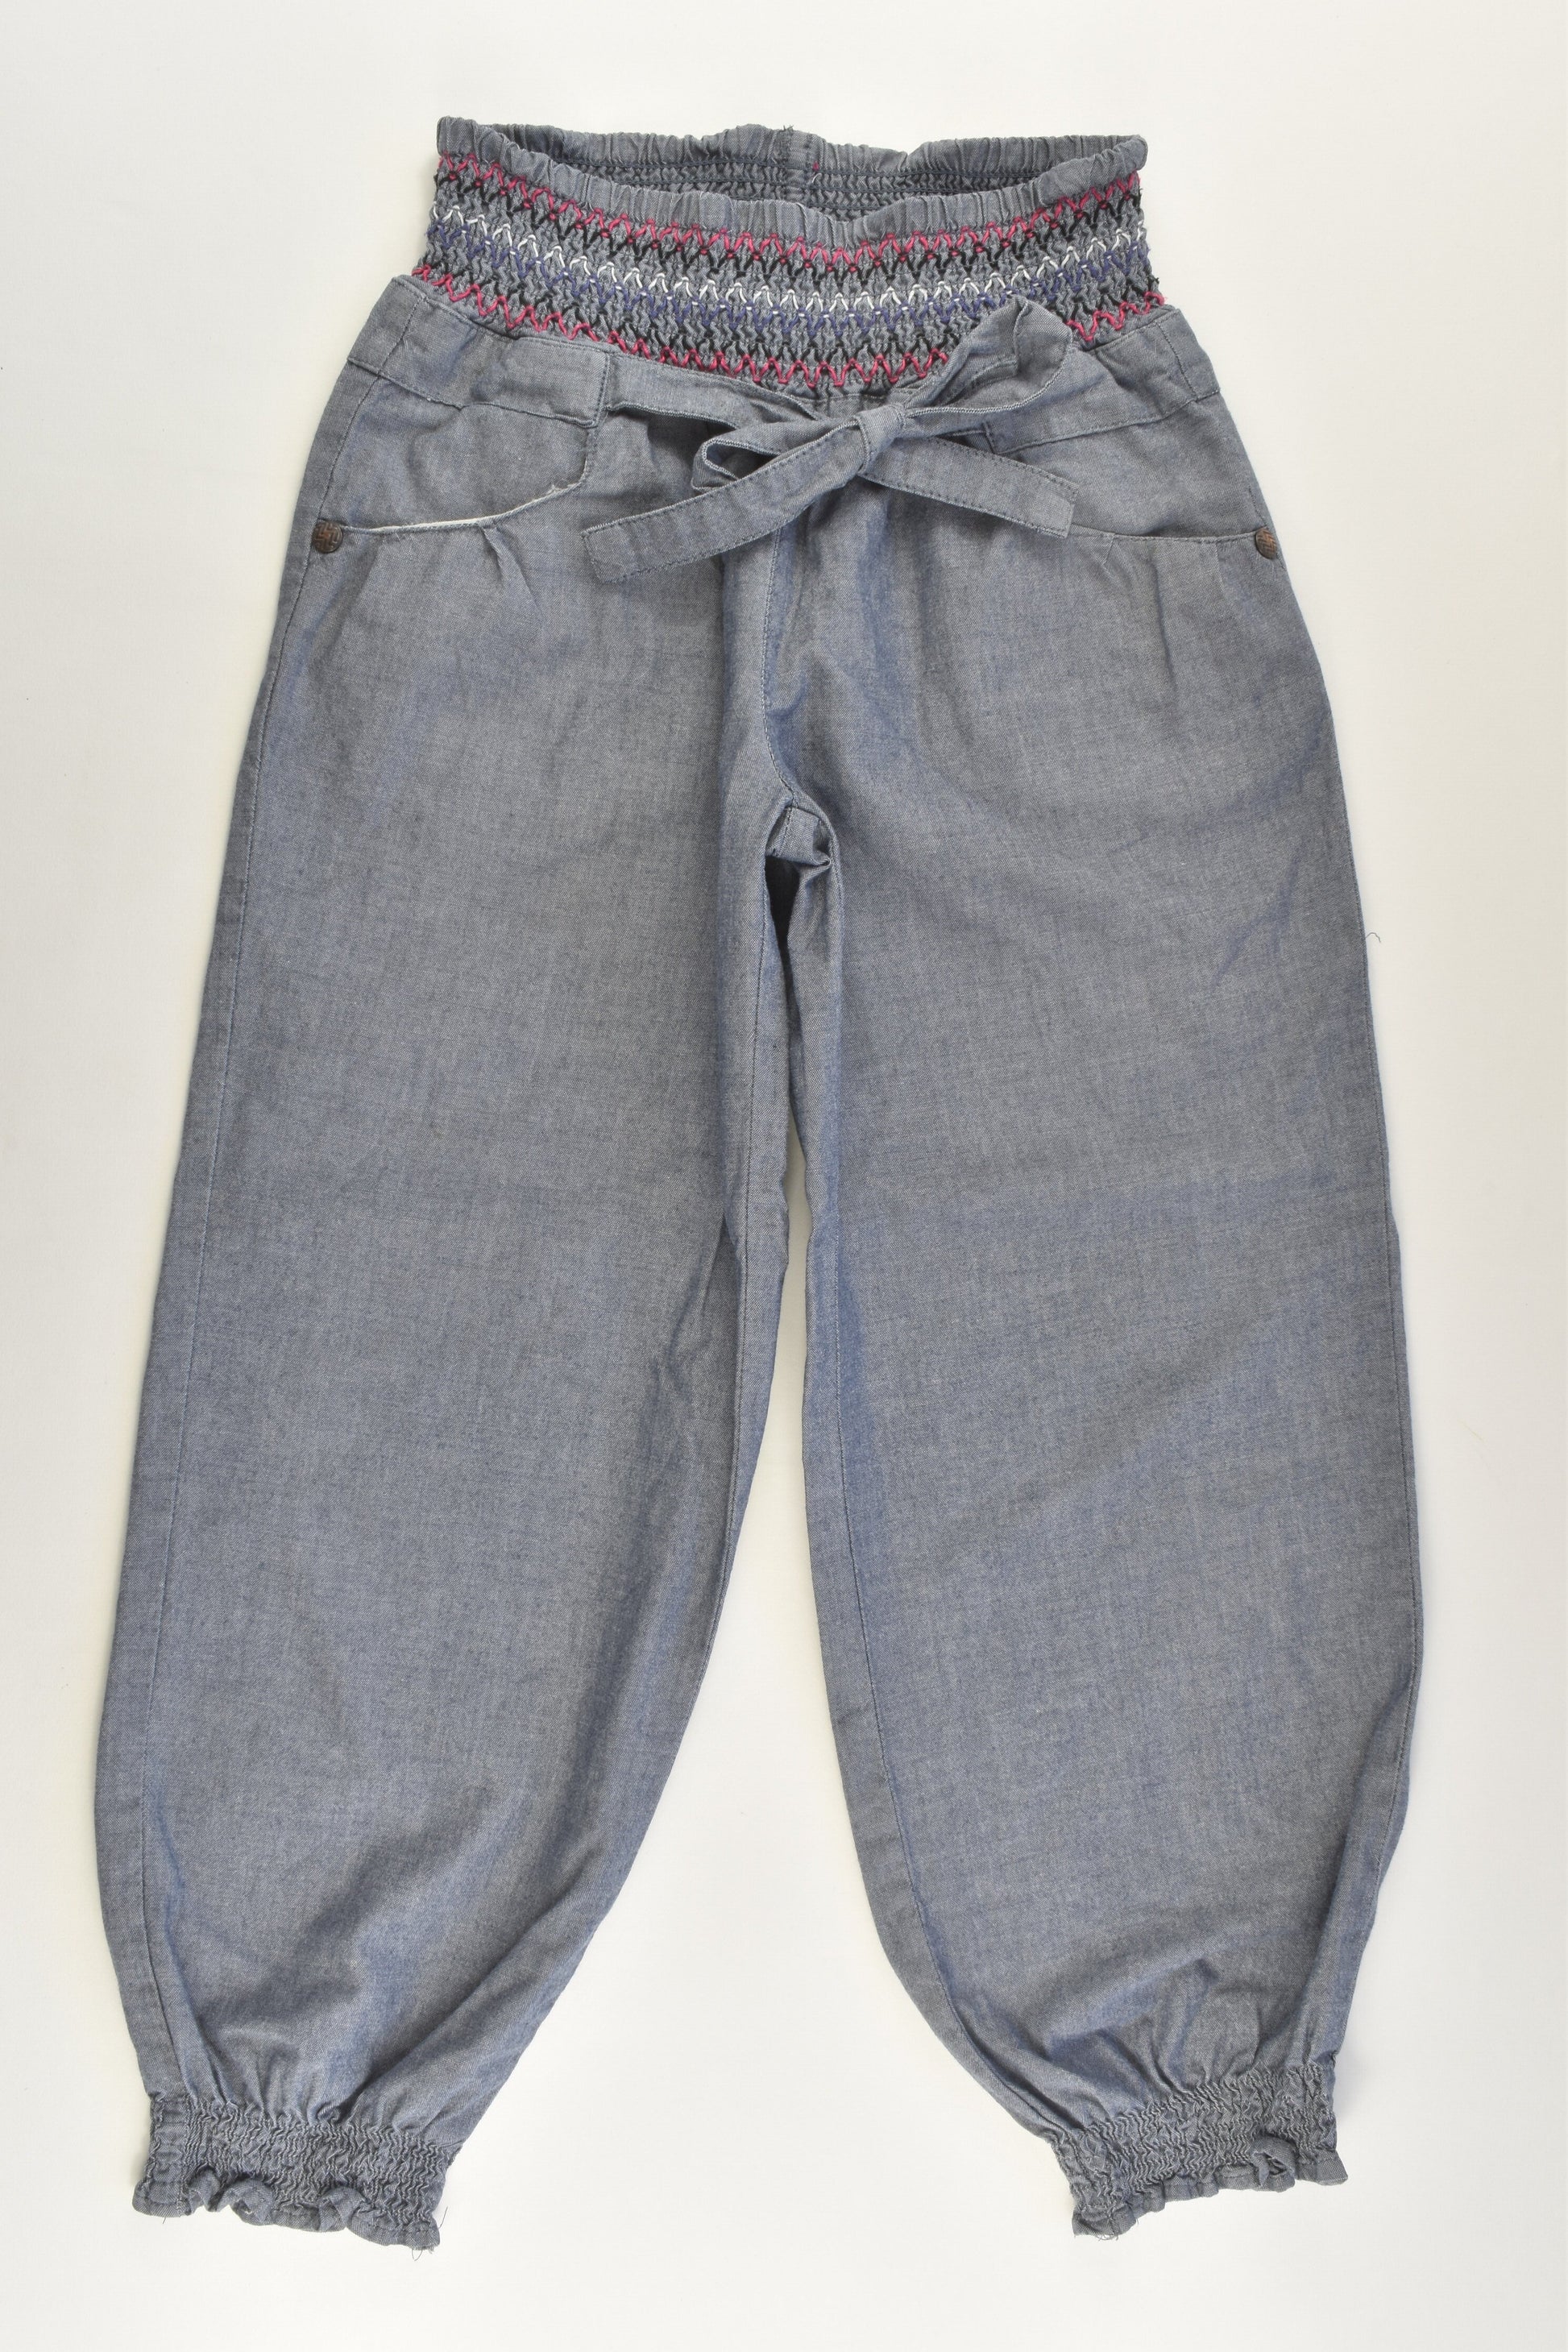 Jack & Milly Size 6 Lightweight Baggy Pants